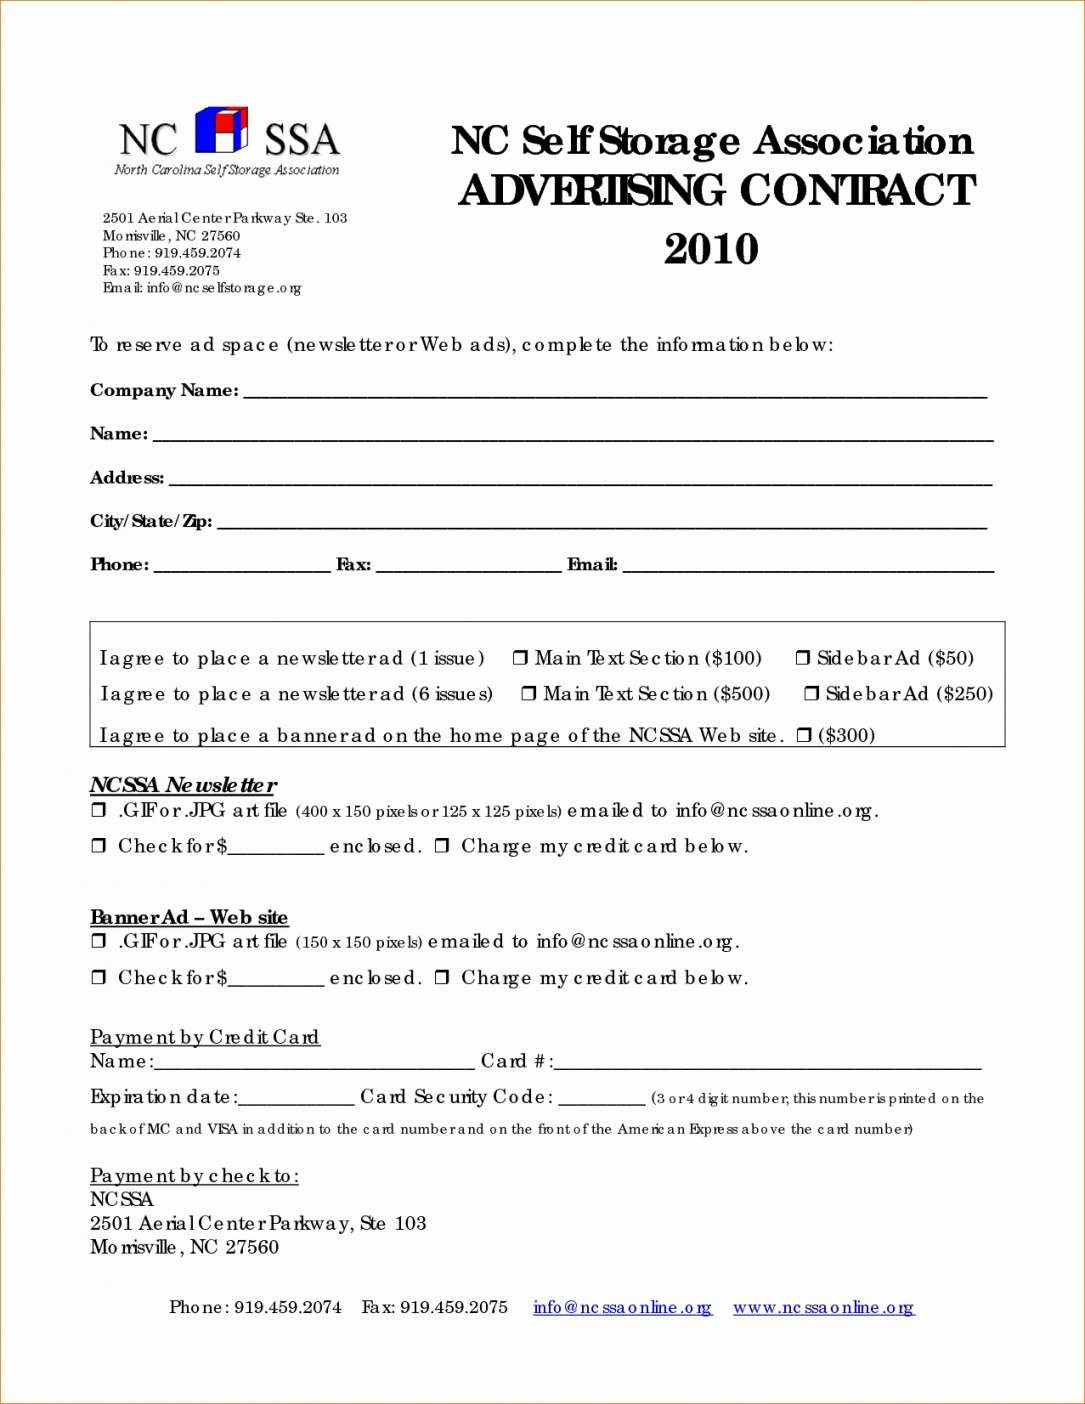 Example Of Online Advertising Agreement Template Free From Our with Free Online Advertising Agreement Template